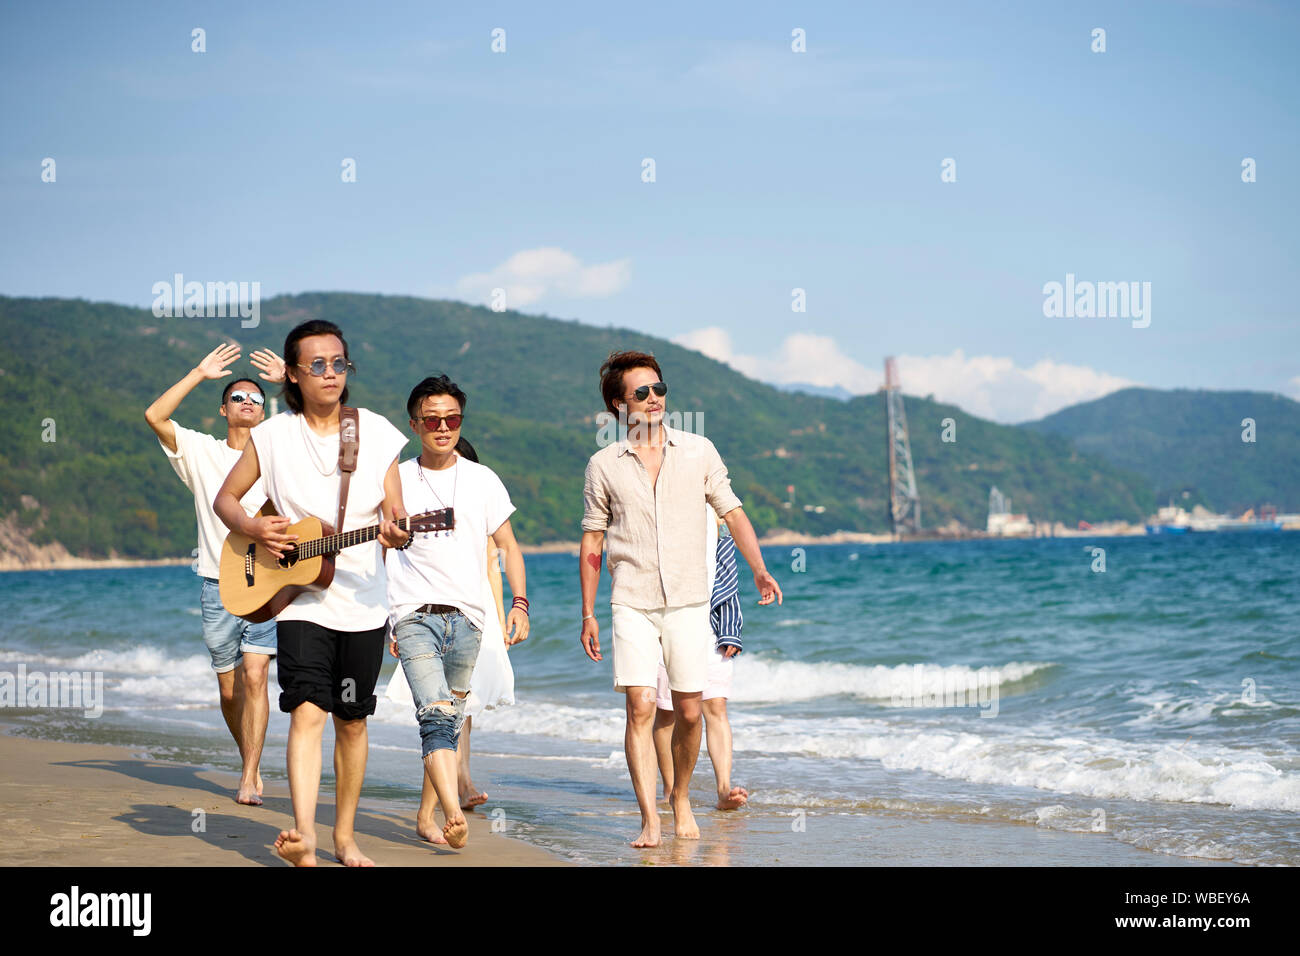 group of young asian adults men walking on beach playing guitar Stock Photo